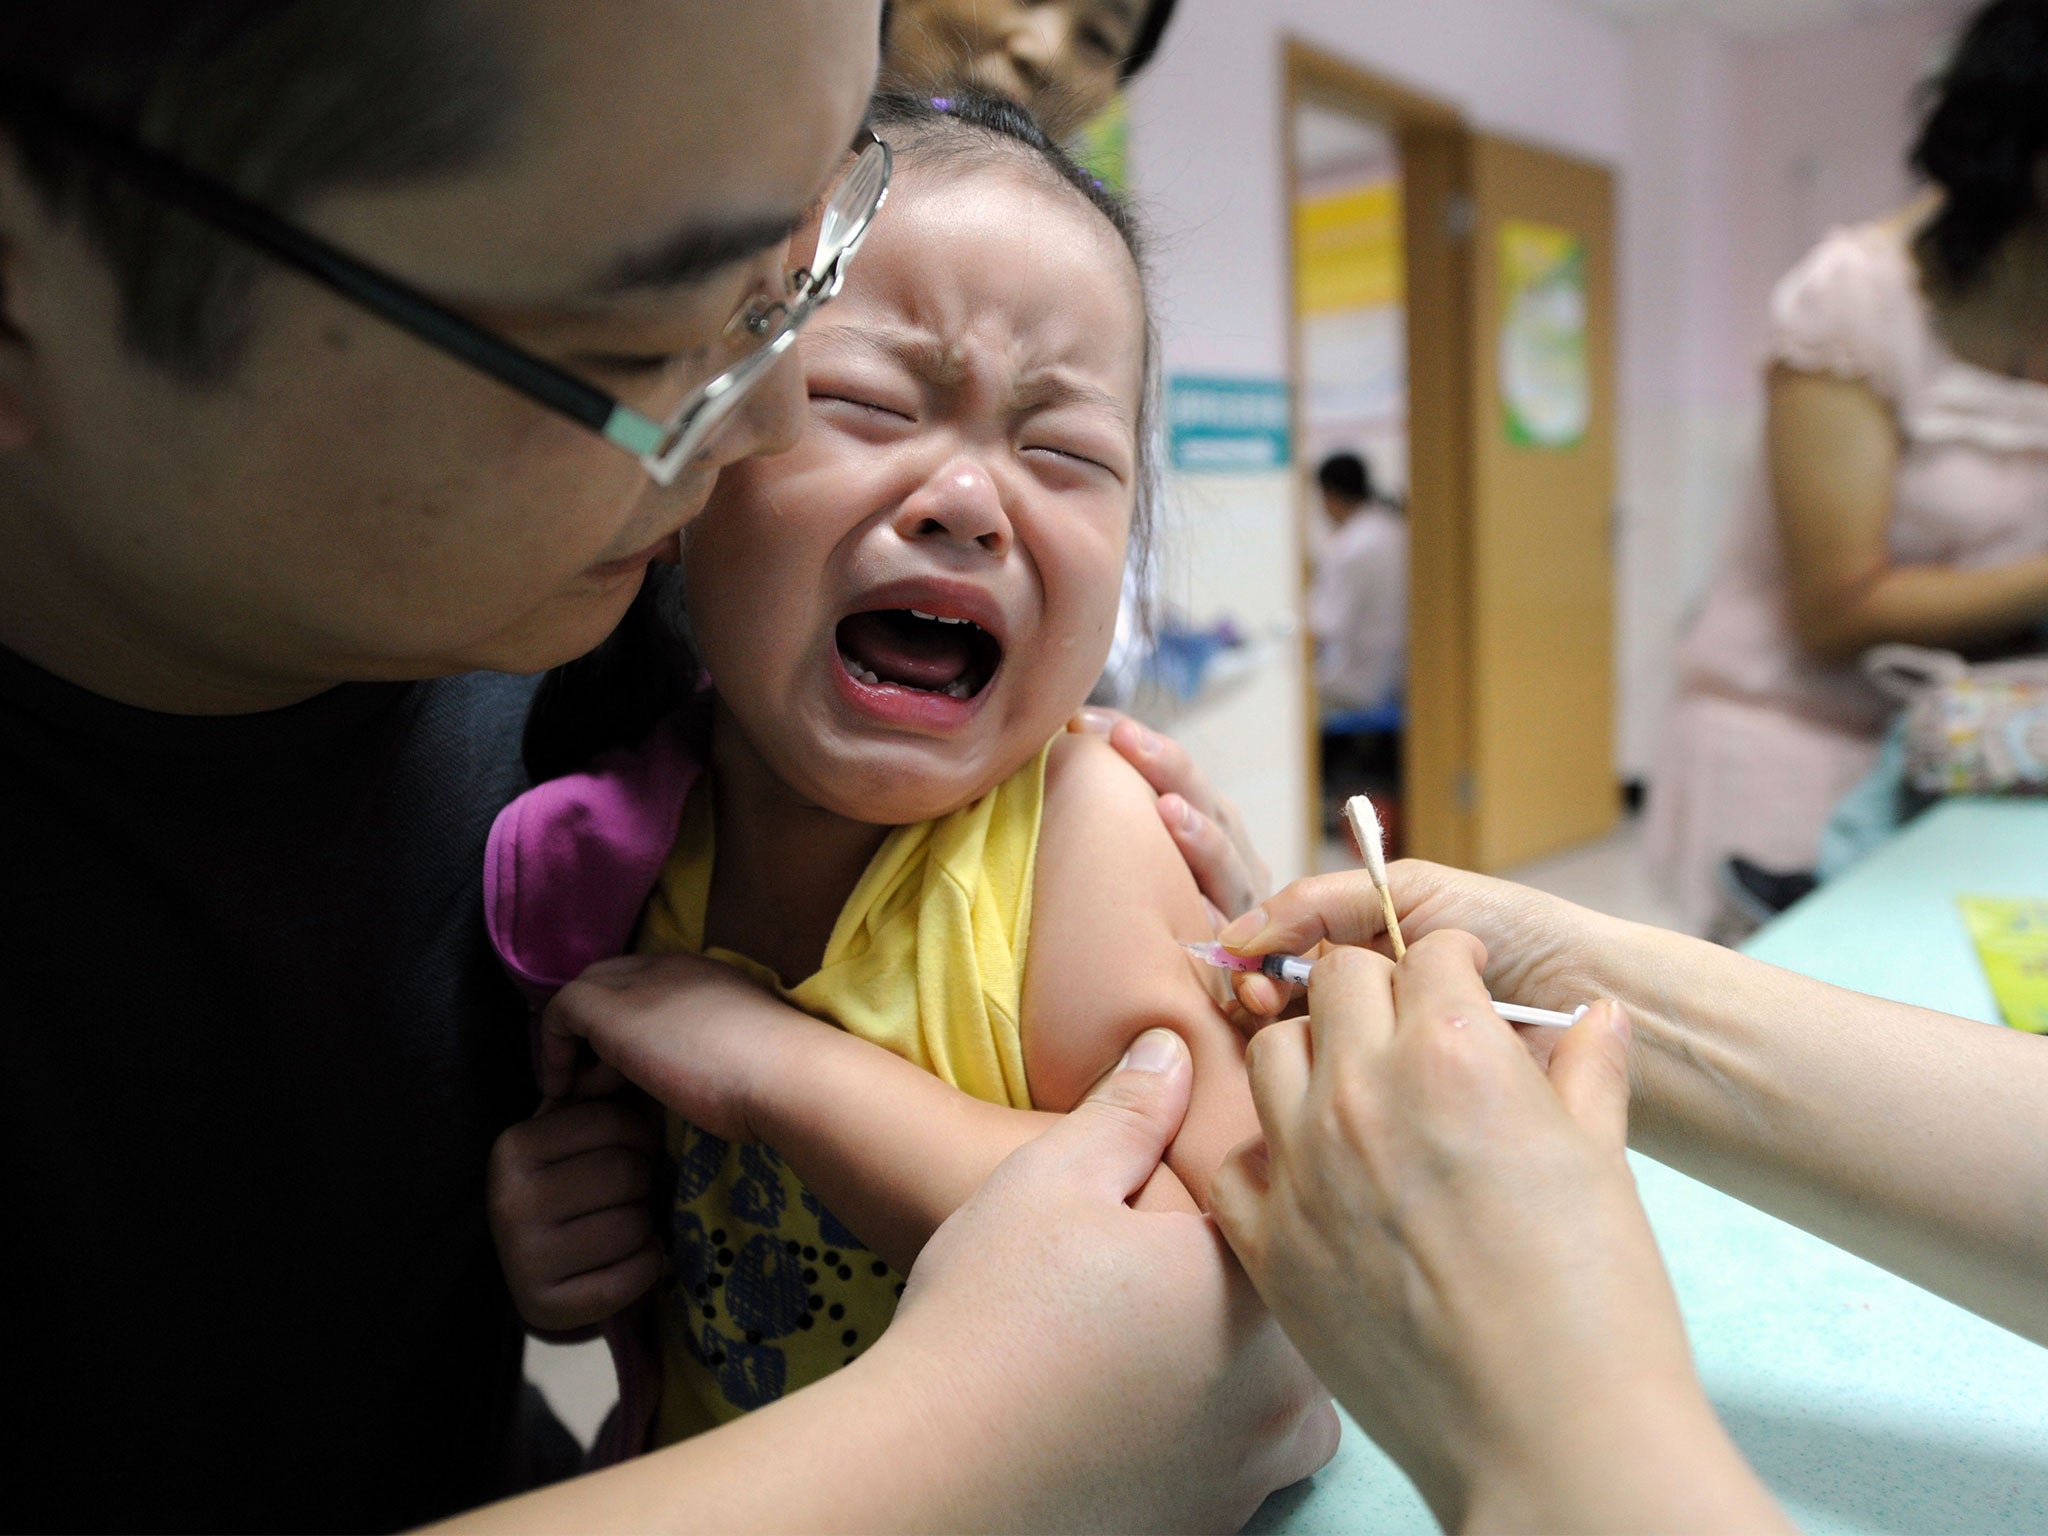 Regulators have ordered Changsheng to recall the vaccine and halt production